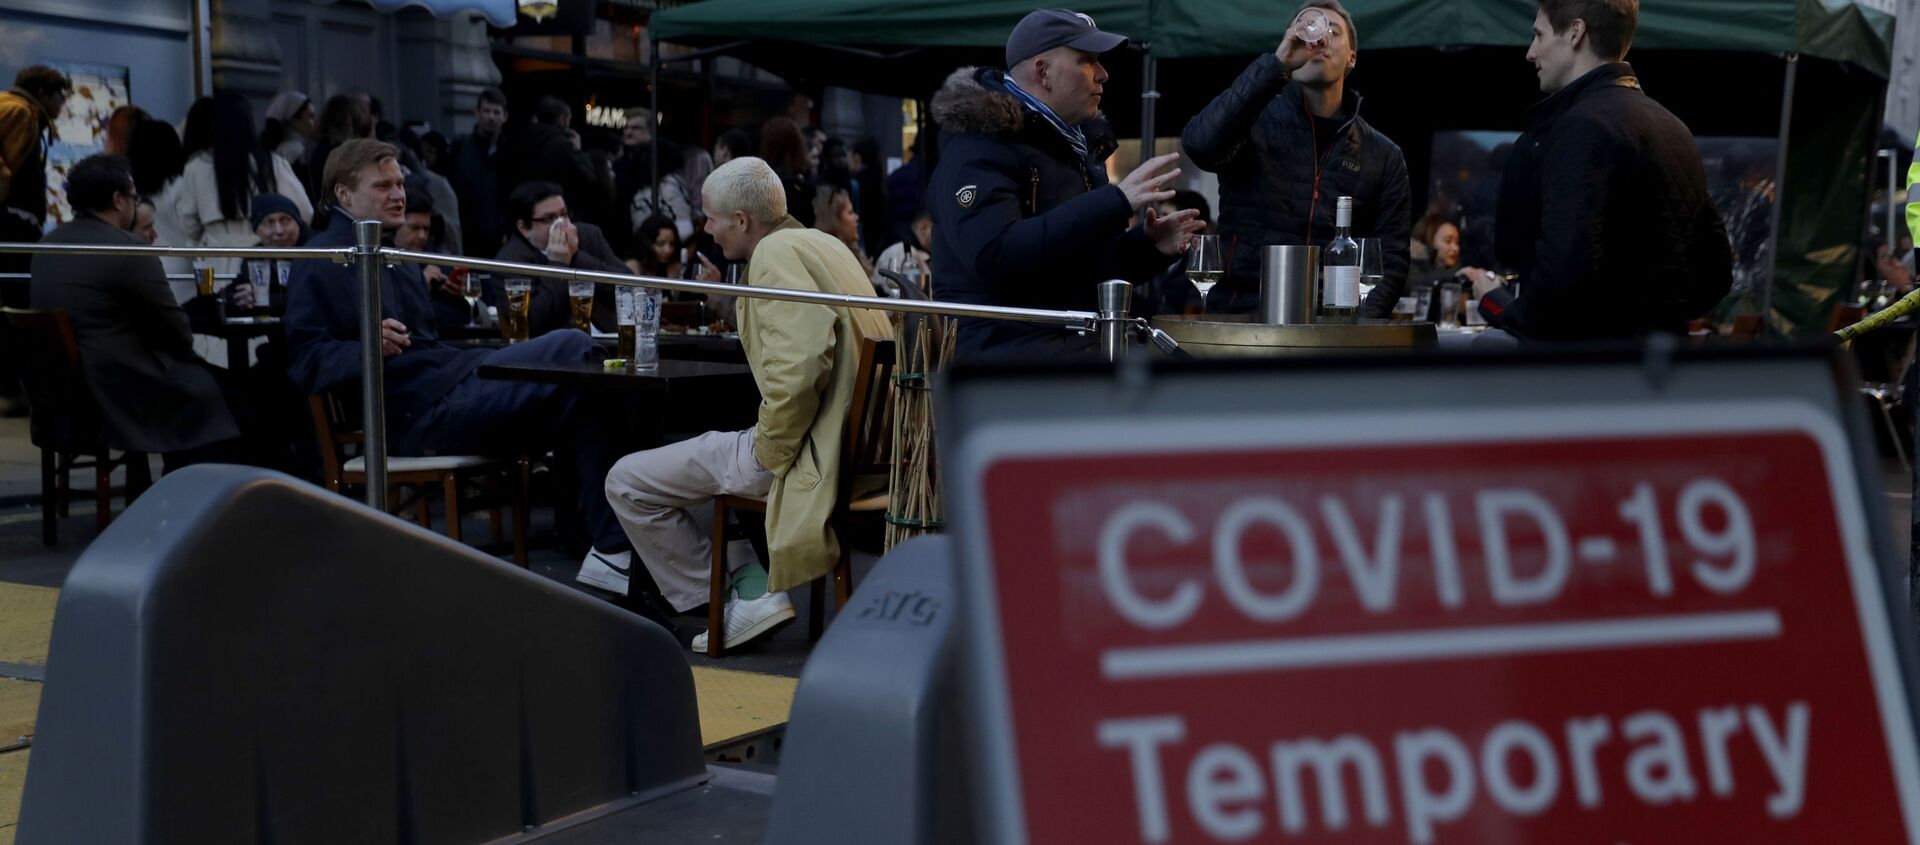 People sit at outdoor tables setup today for drinks to be served in the Soho area of central London, on the day some of England's third coronavirus lockdown restrictions were eased by the British government, Monday, April 12, 2021 - Sputnik International, 1920, 13.04.2021